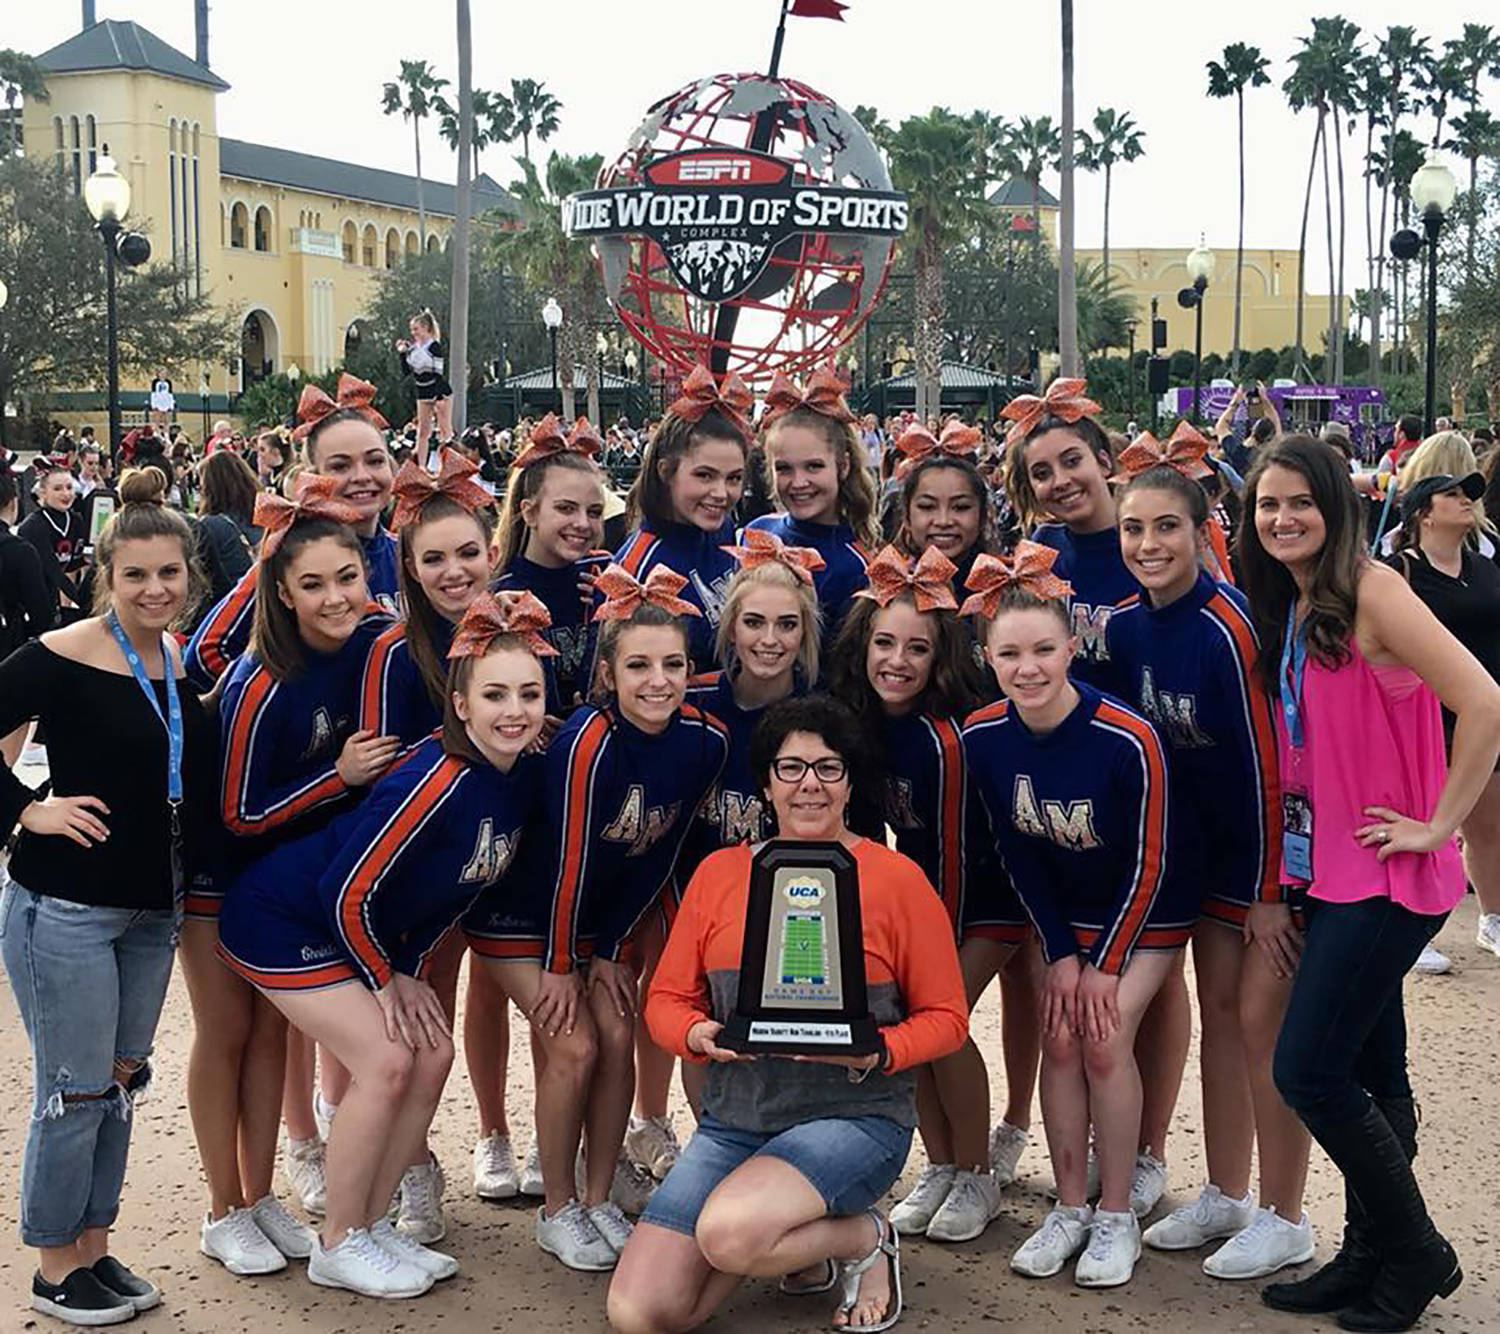 Principal Terri Herren, with the trophy, joins the Auburn Mountainview Cheer Team after its strong performance at the UCA National High School Cheerleading Championships at the Walt Disney World Resort in Orlando, Fla., Feb. 10-11. COURTESY PHOTO